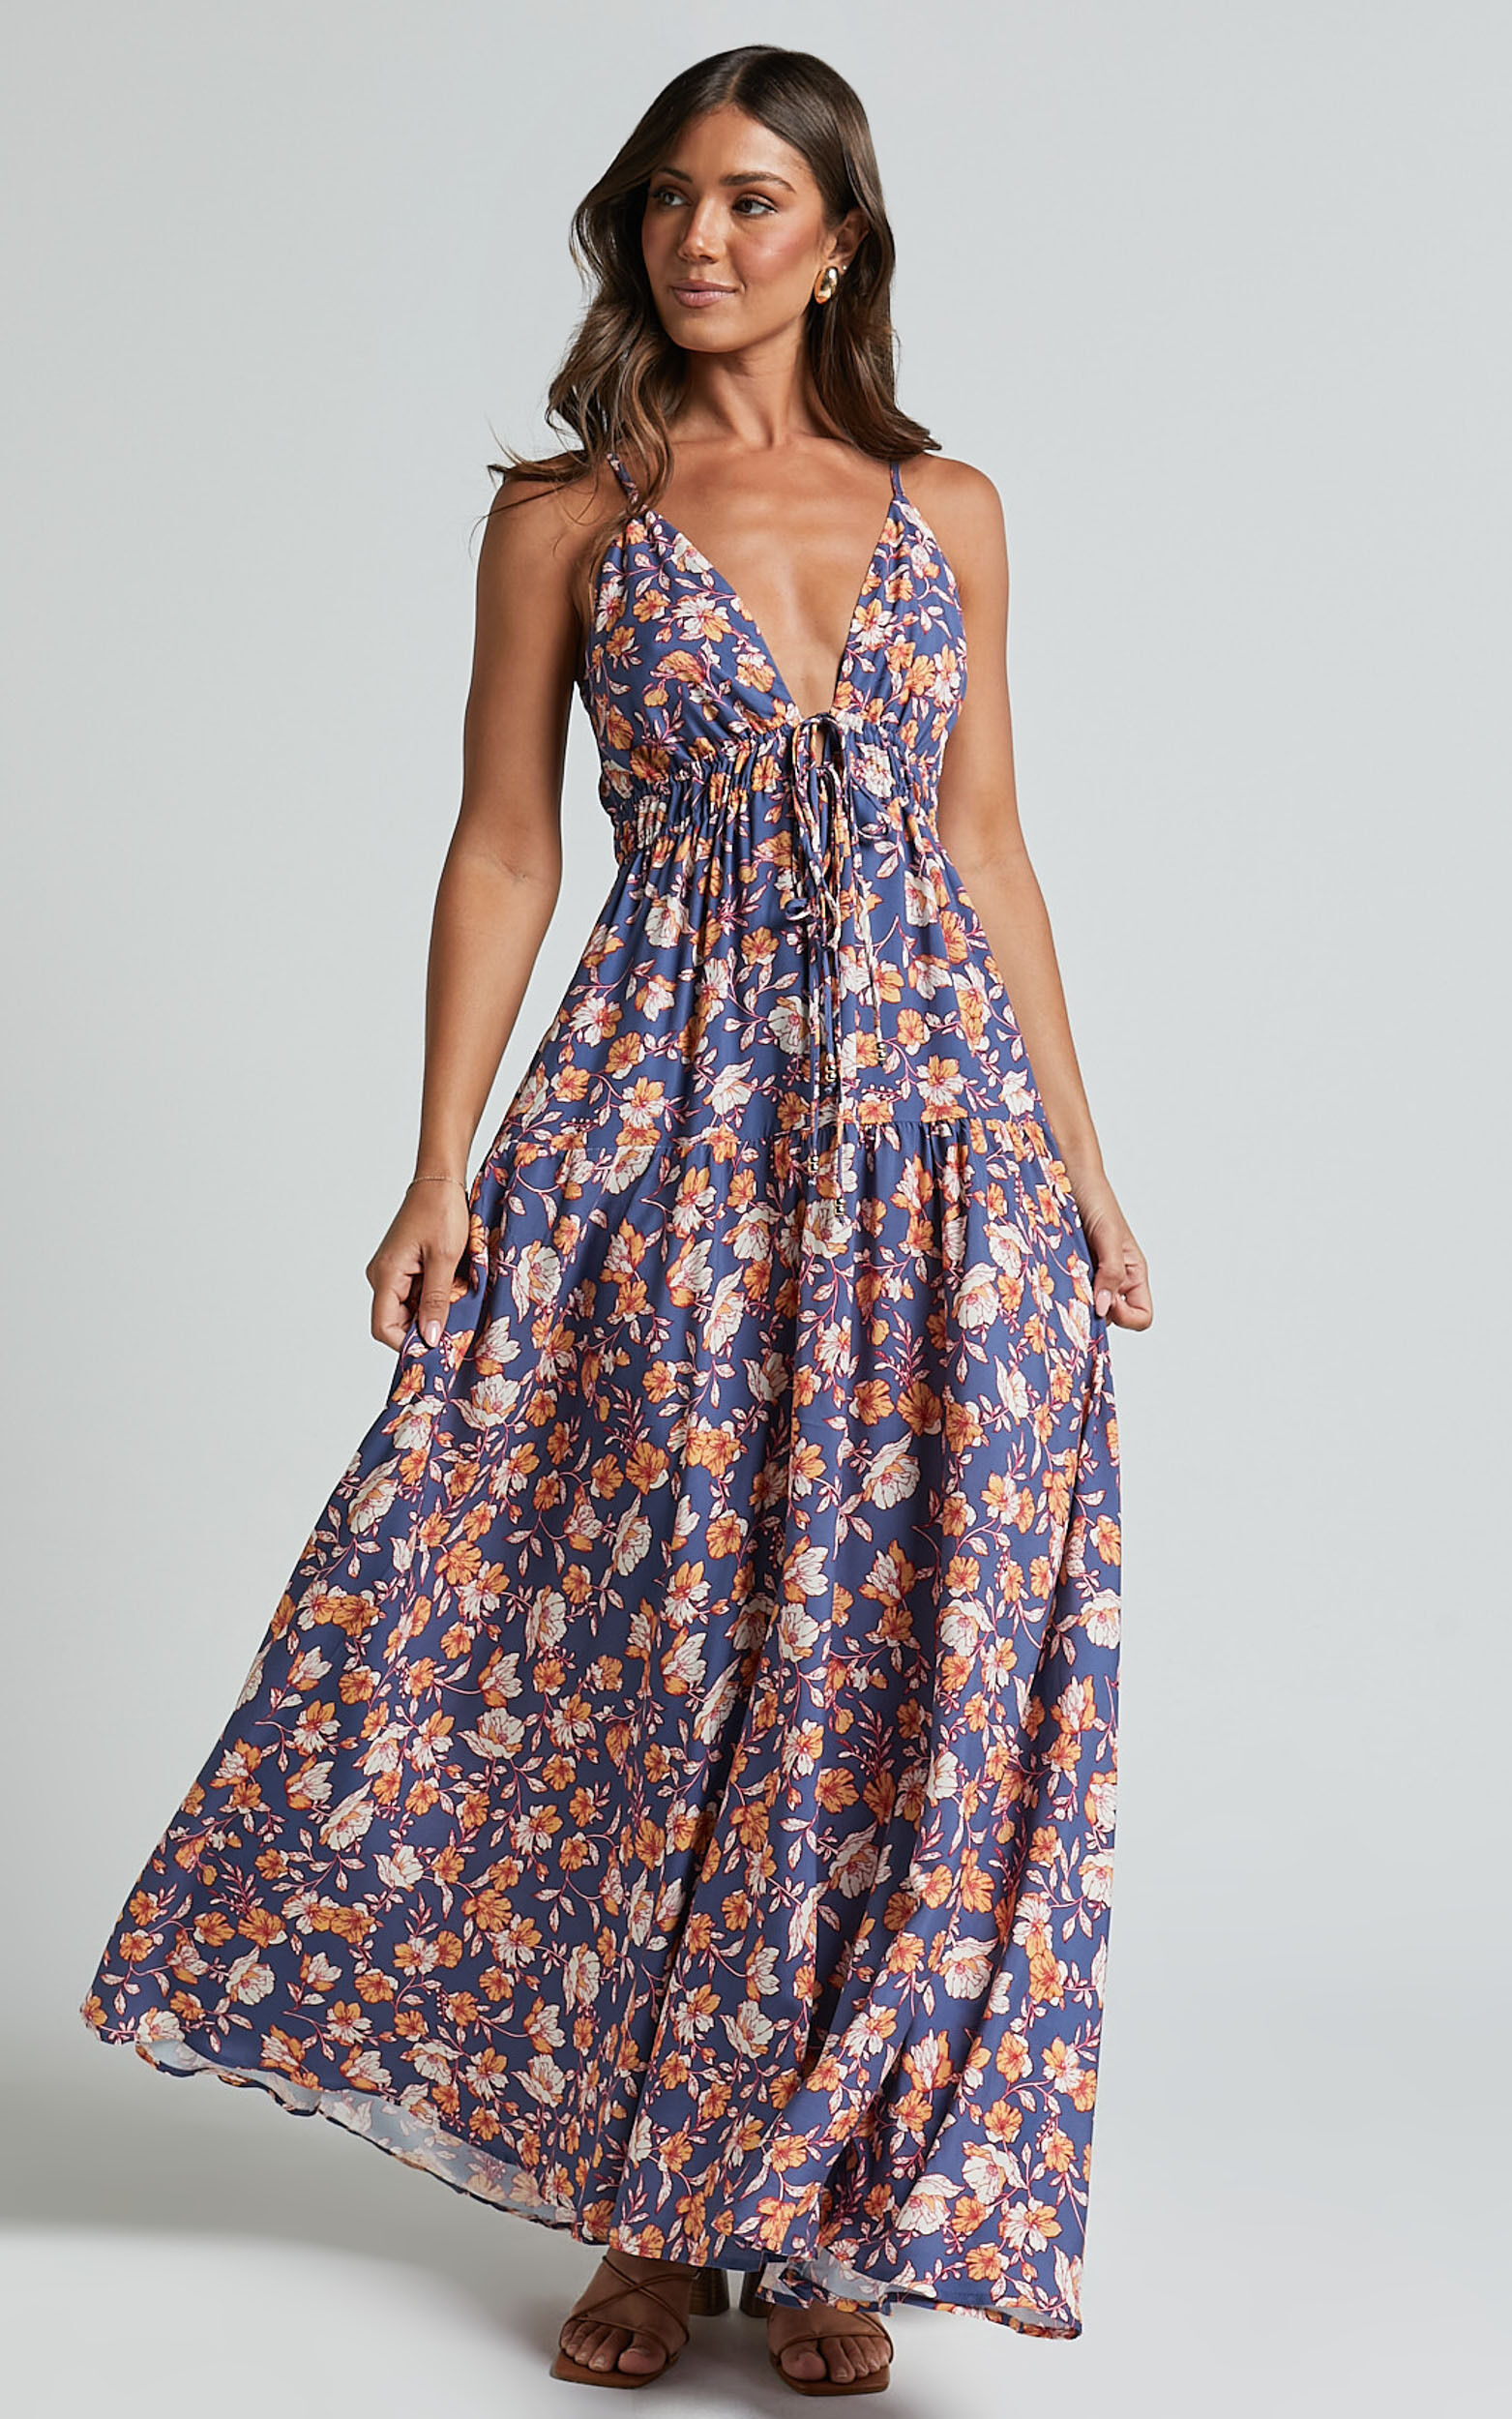 Aelita Maxi Dress - Strappy Tie Front Dress in Navy Floral - 06, NVY1